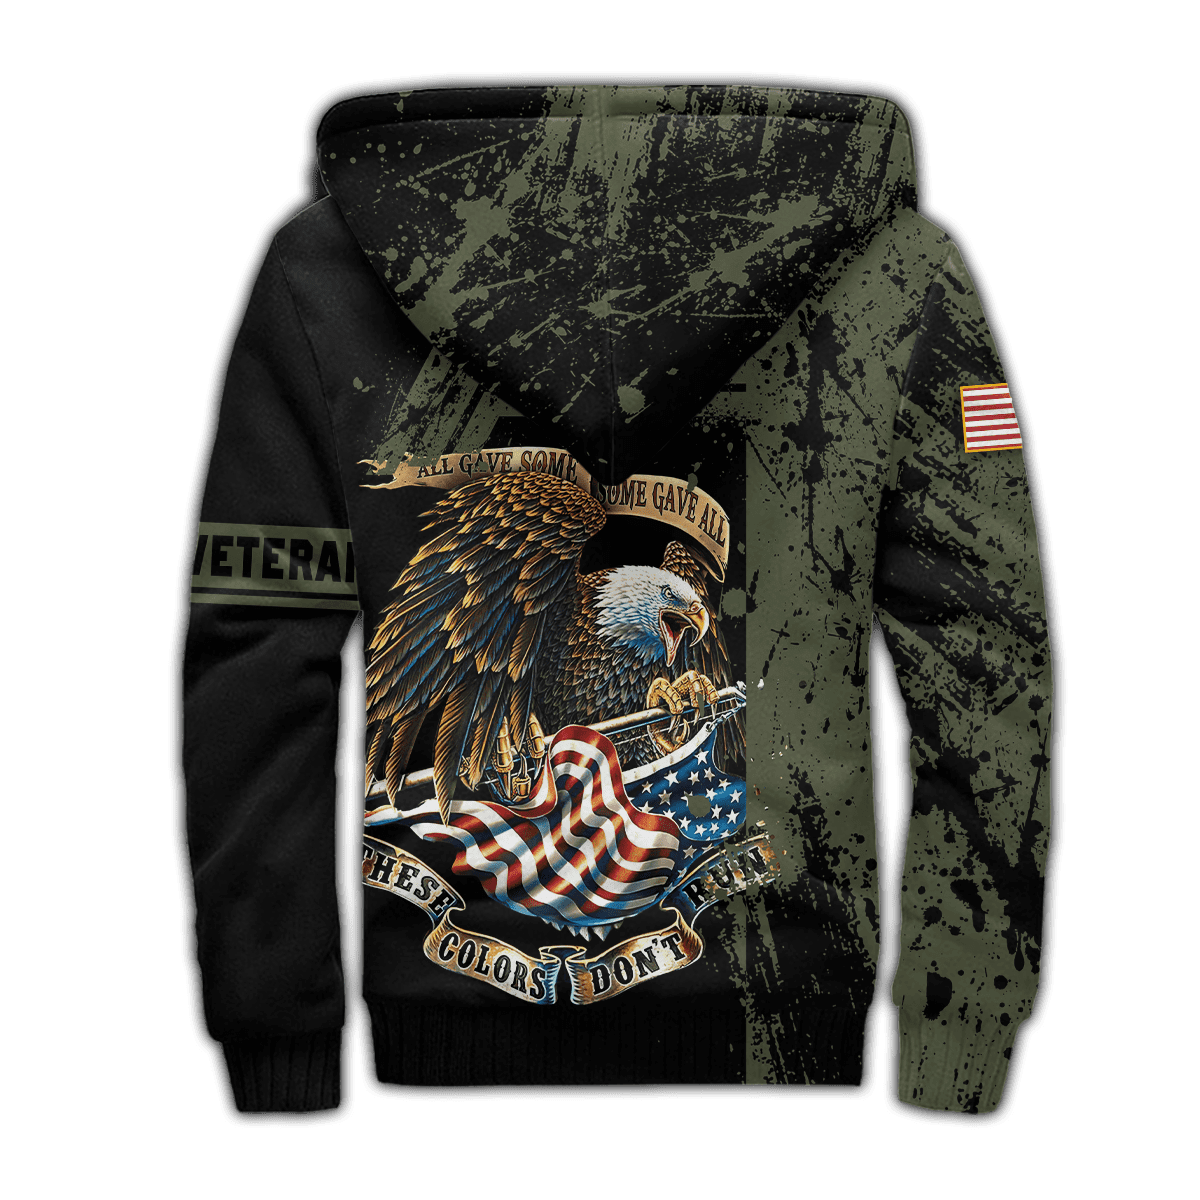 US Army - All Gave Some Some Gave All Zip Hoodie